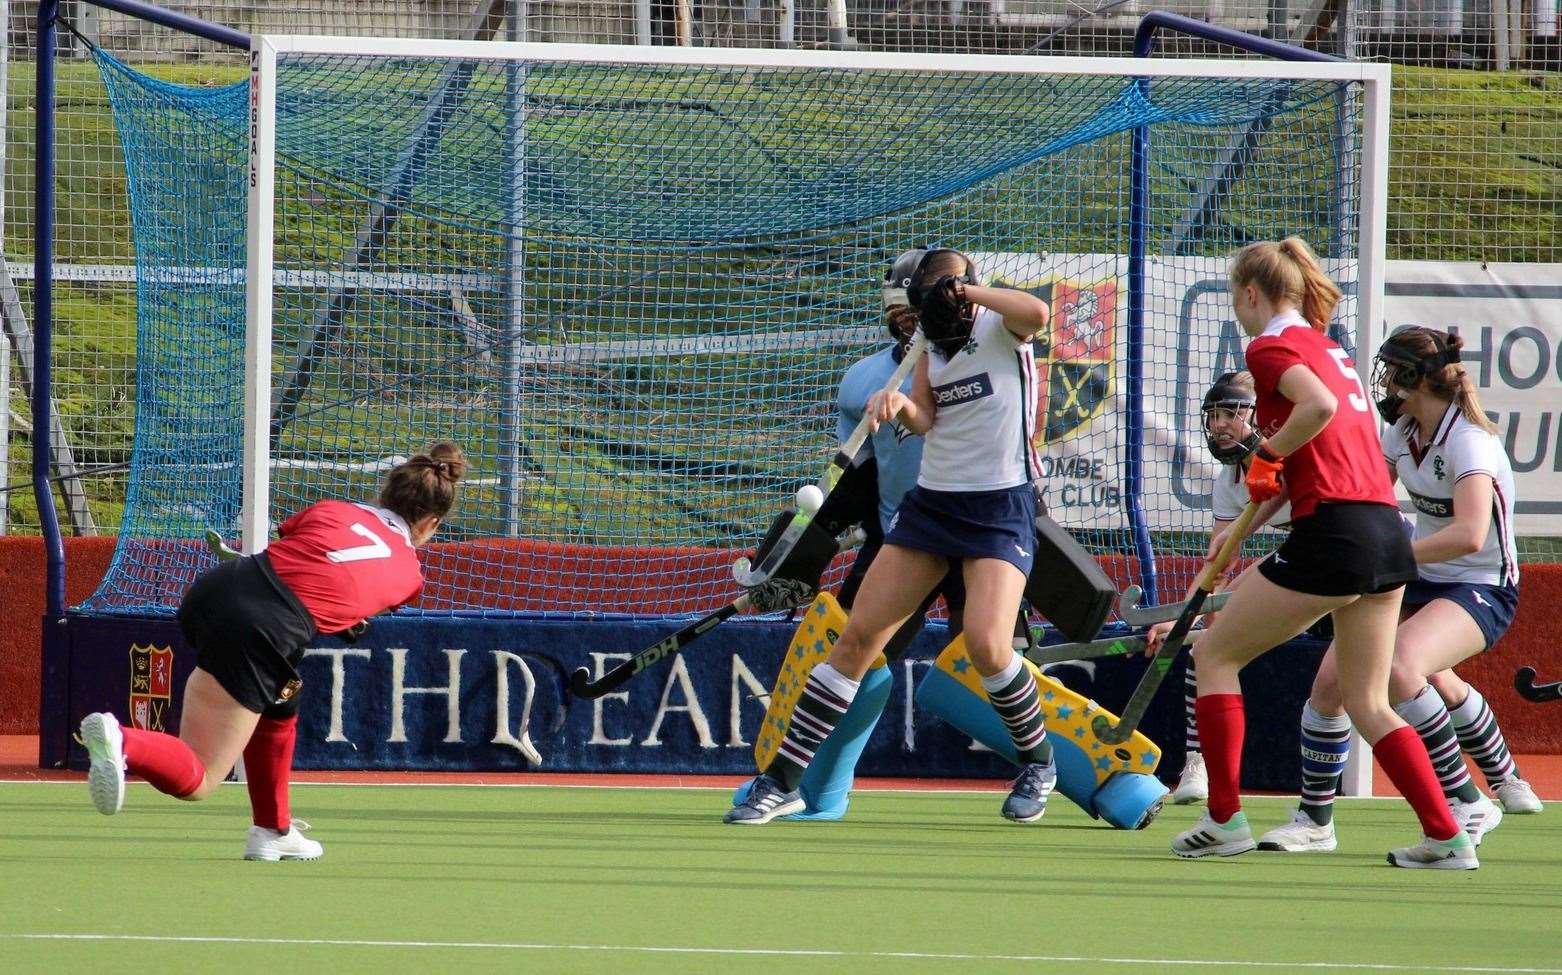 Emma Bandurak with an attempt at goal for Holcombe against Surbiton 2s Picture: Jon Goodall